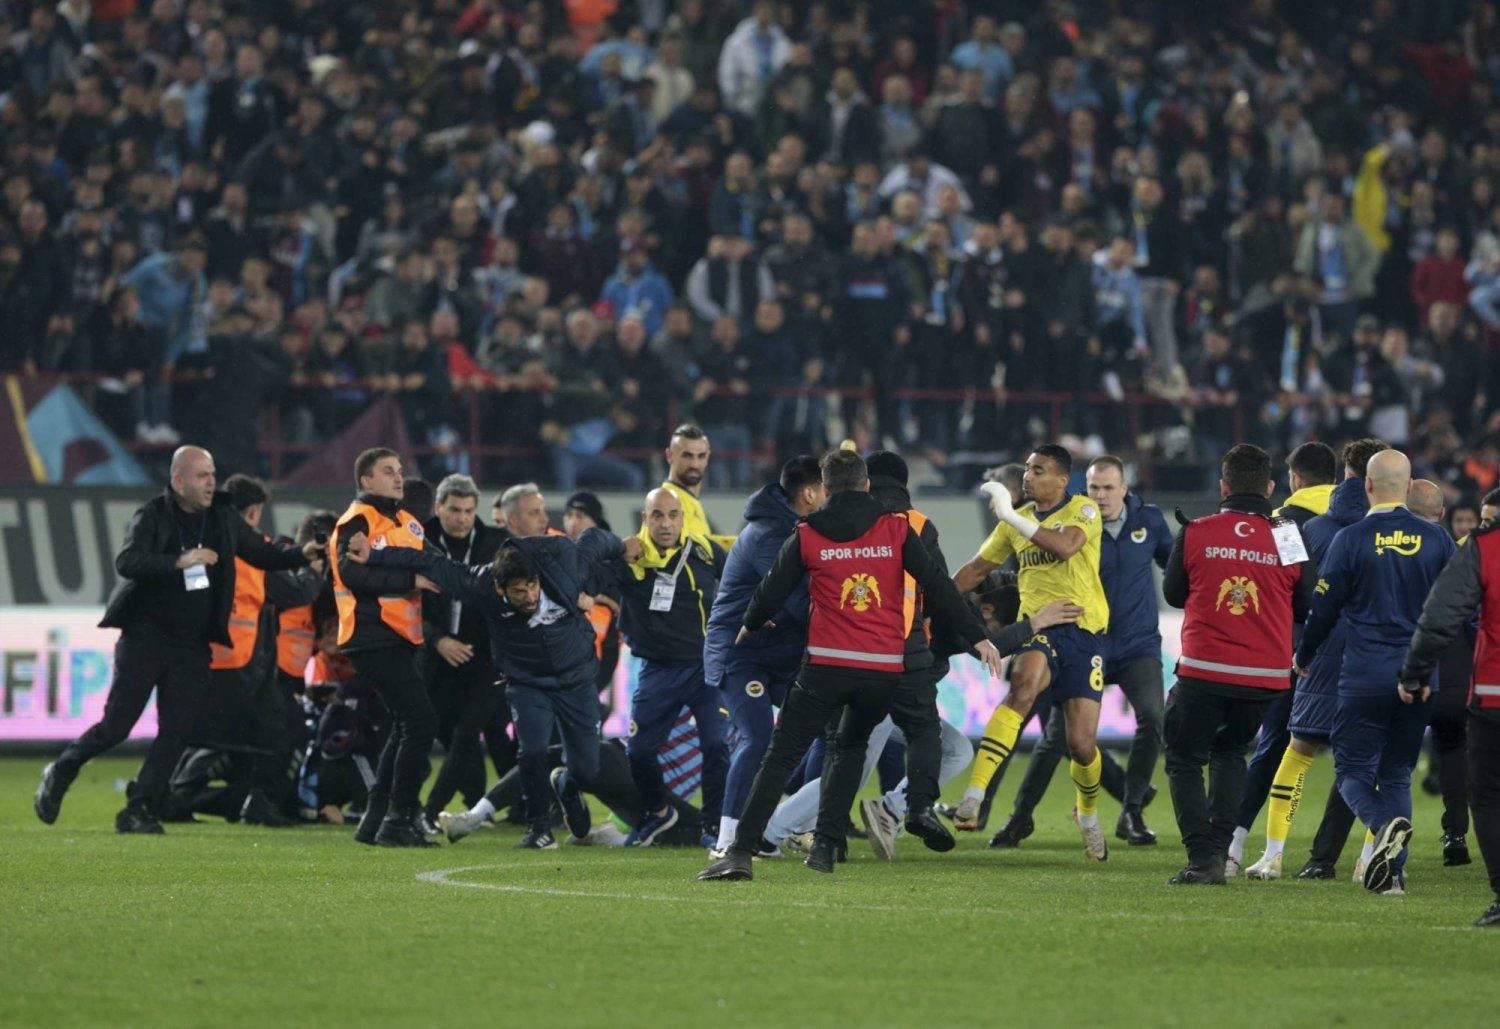 FIFA President Calls For Safety Measures Following Violent Clash In Turkish Football